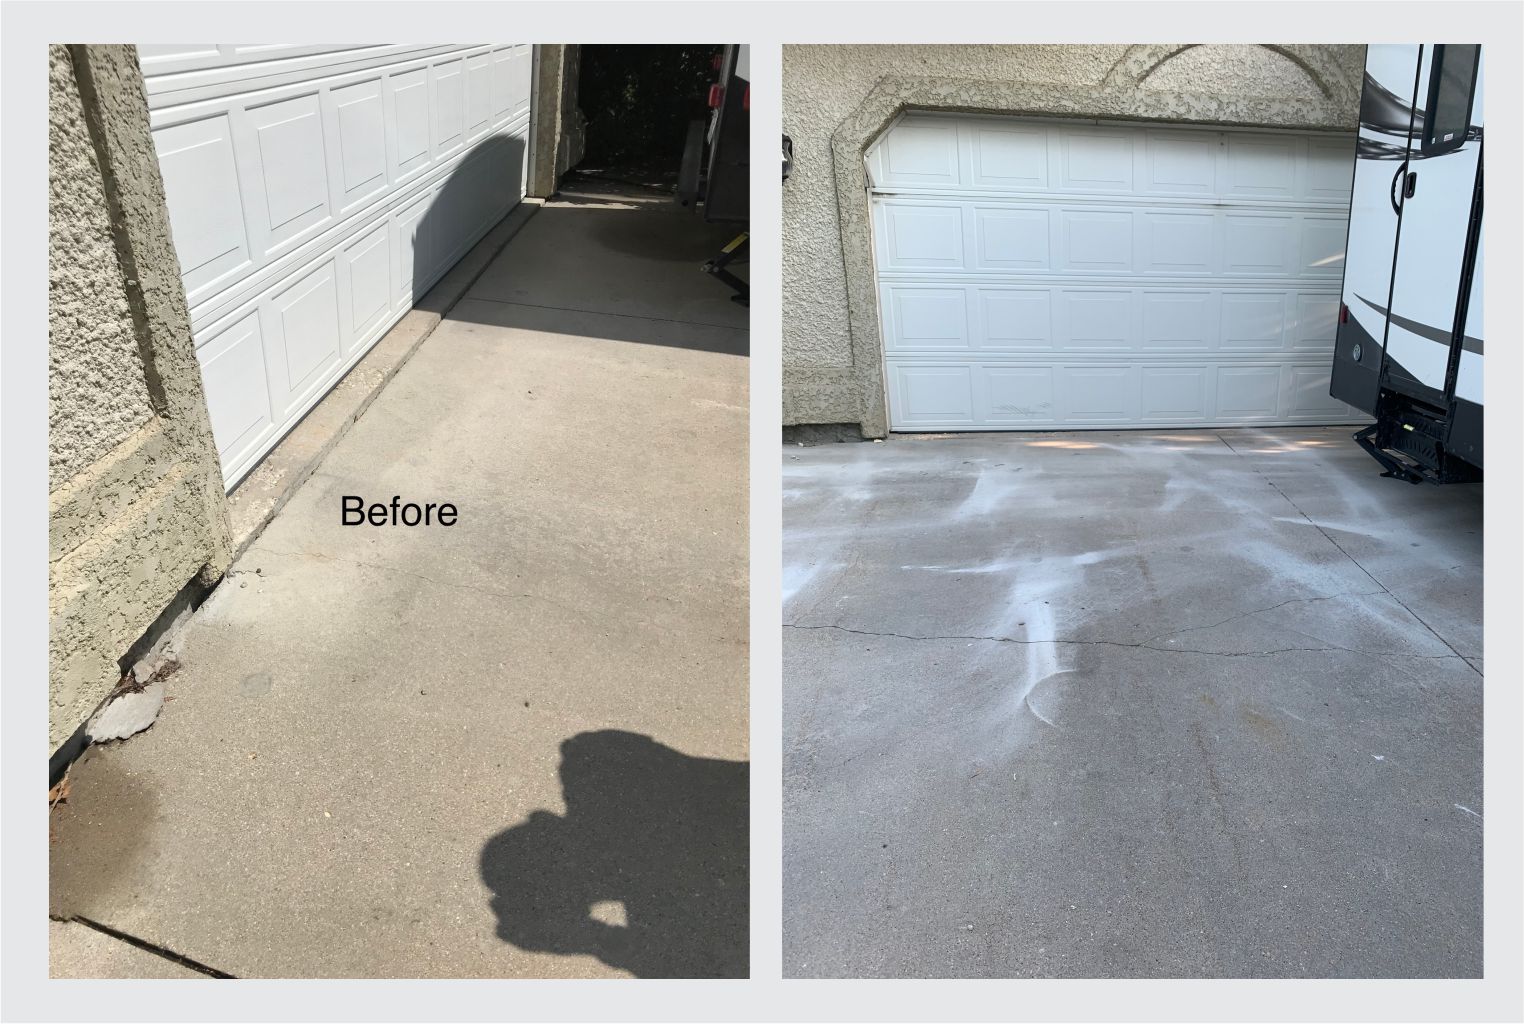 Slab Jacking Before and After image. Lifting concreate with foam to where it needs to be